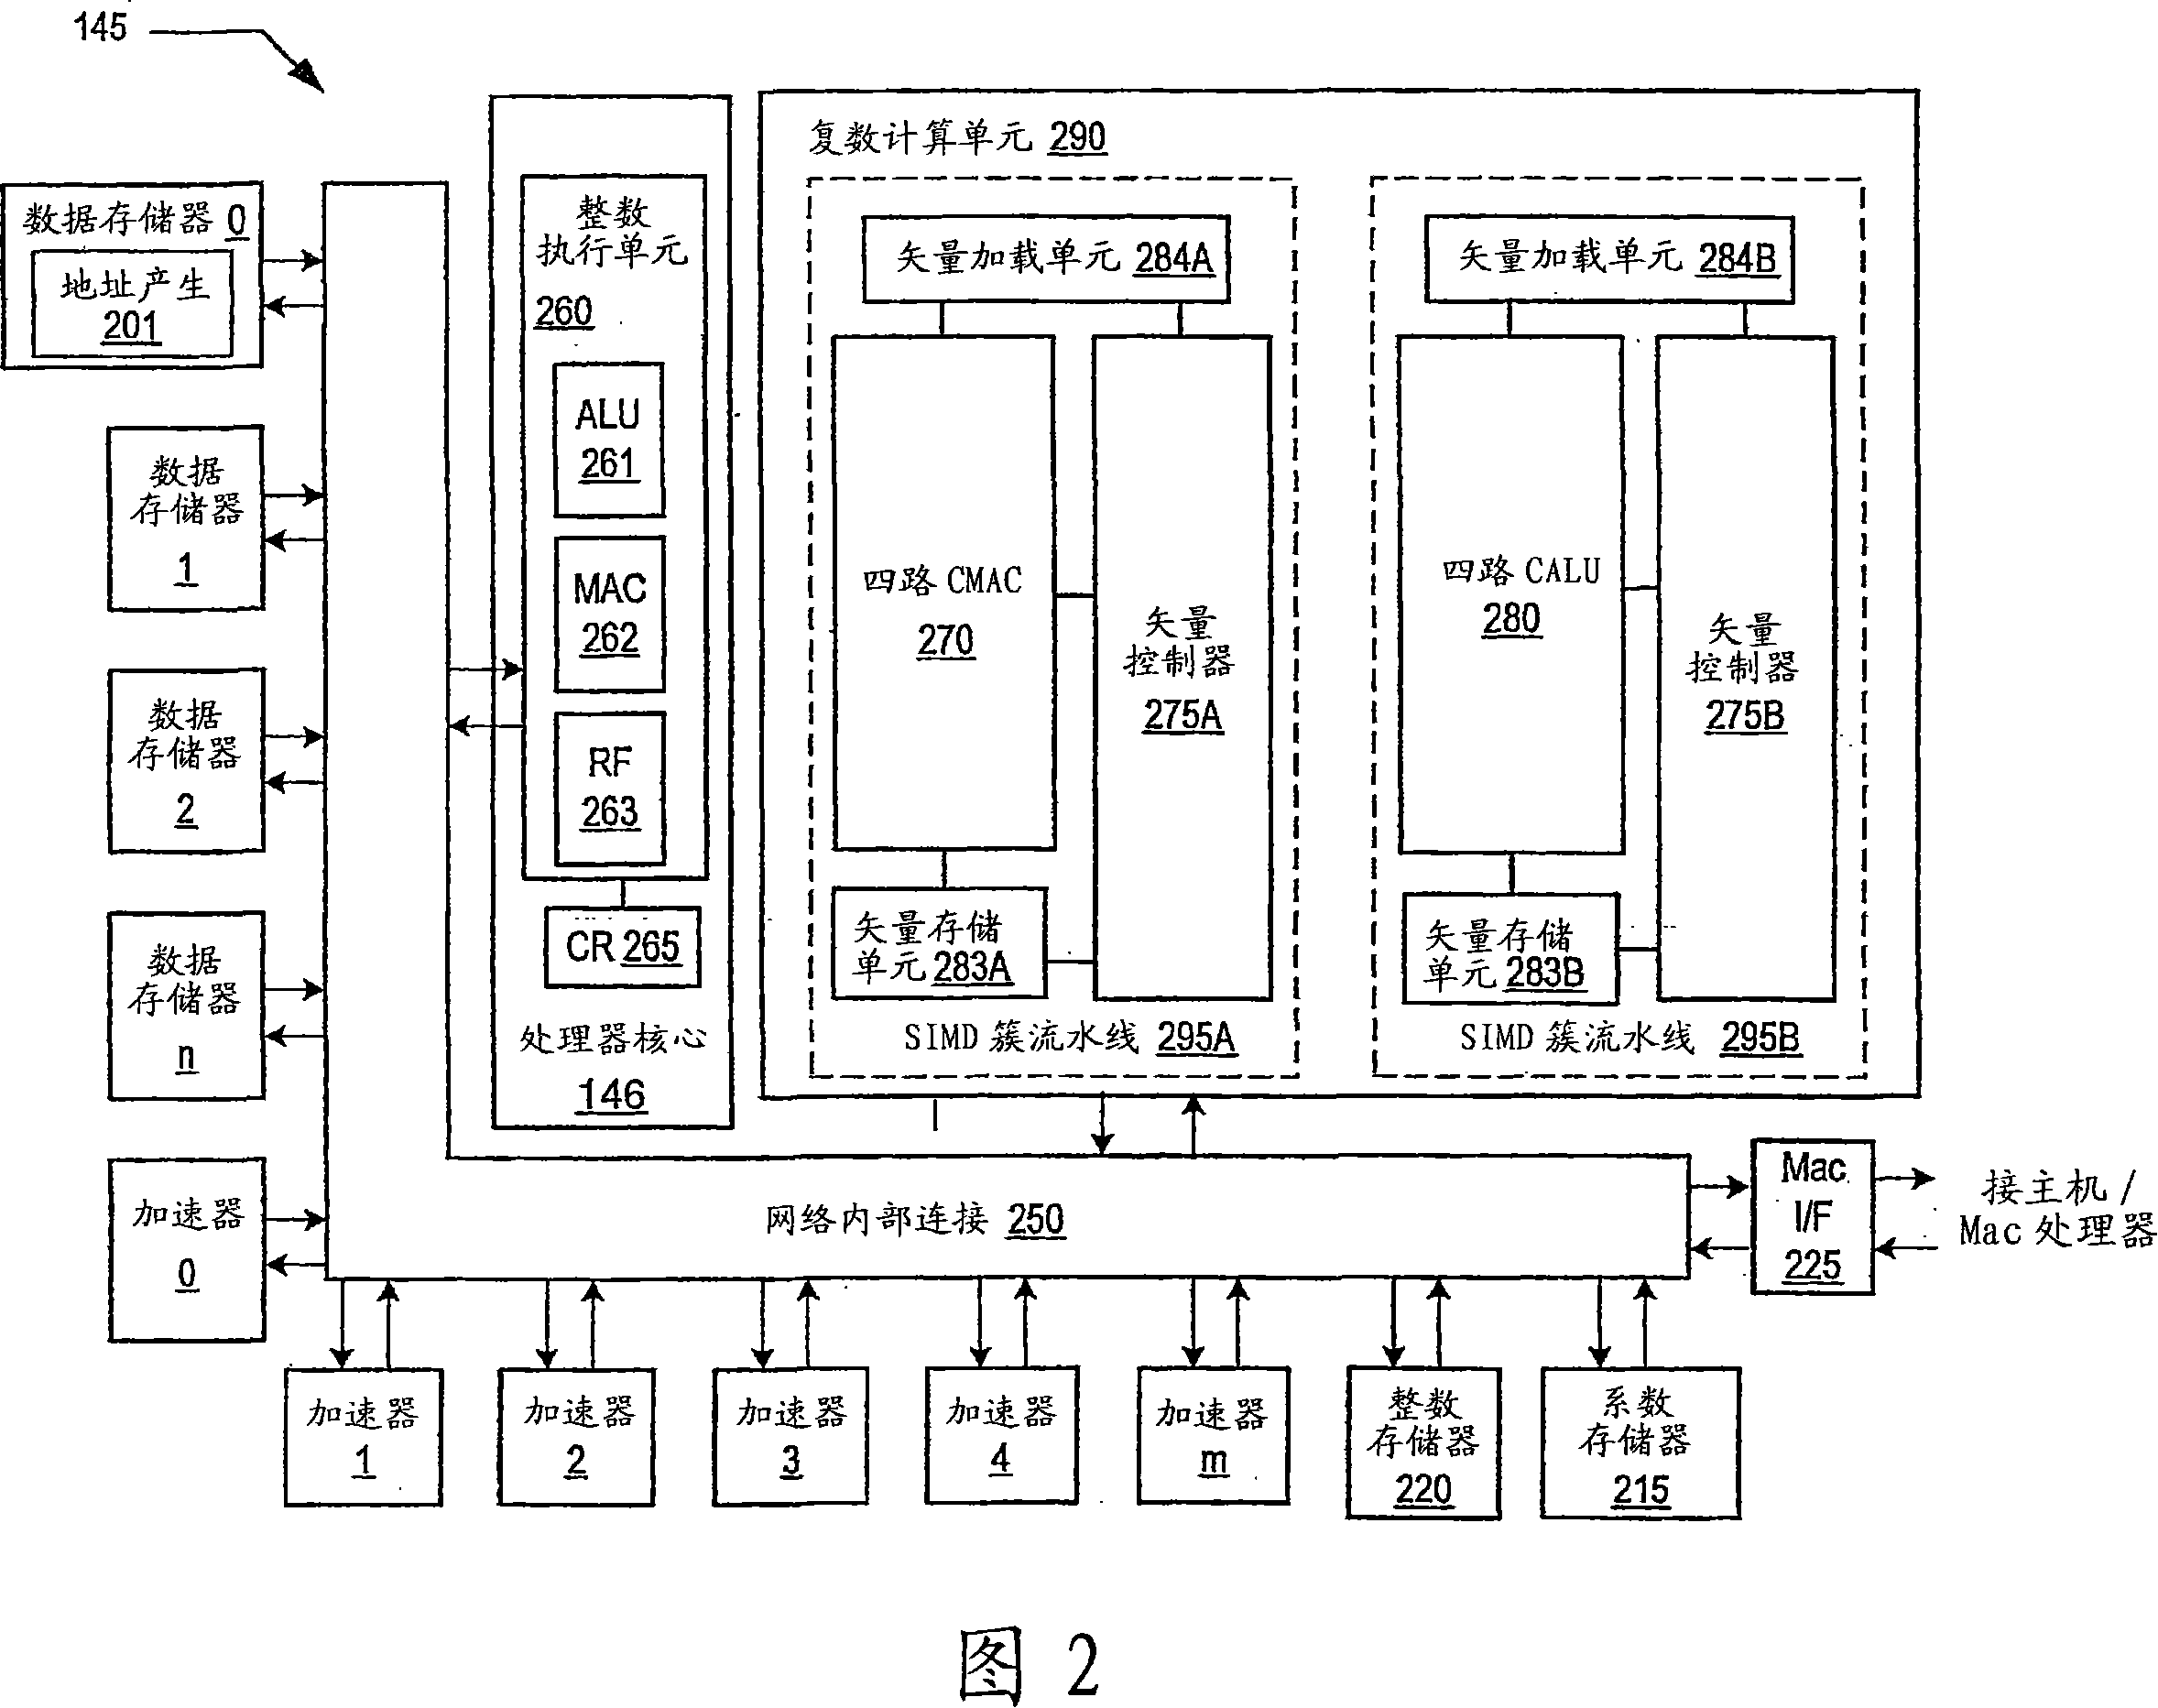 Programmable digital signal processor including a clustered SIMD microarchitecture configured to execute complex vector instructions